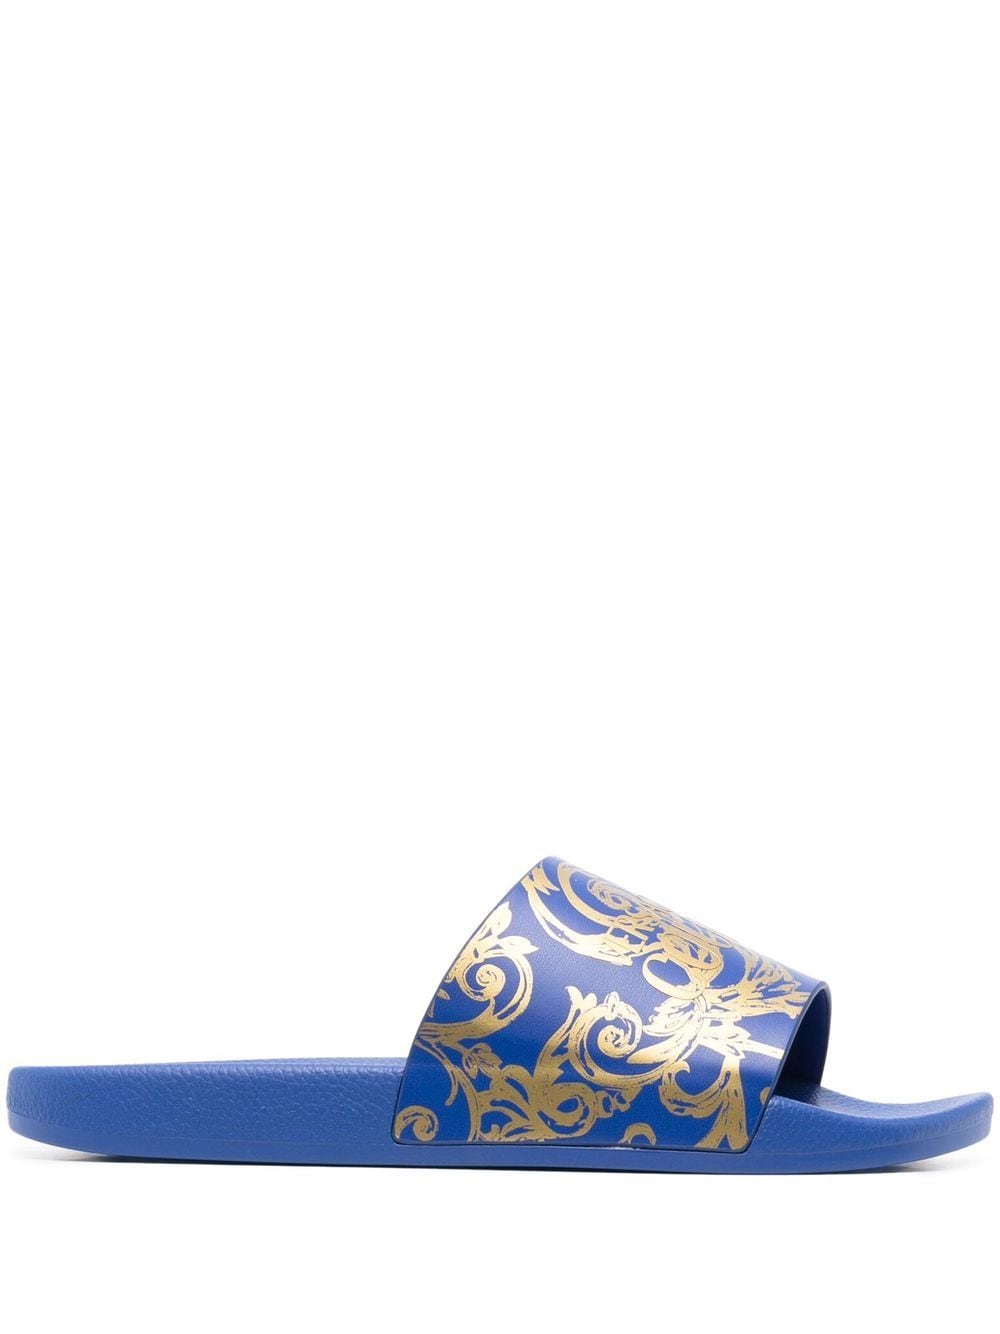 Versace Jeans Couture Baroccoflage printed slides - Blue